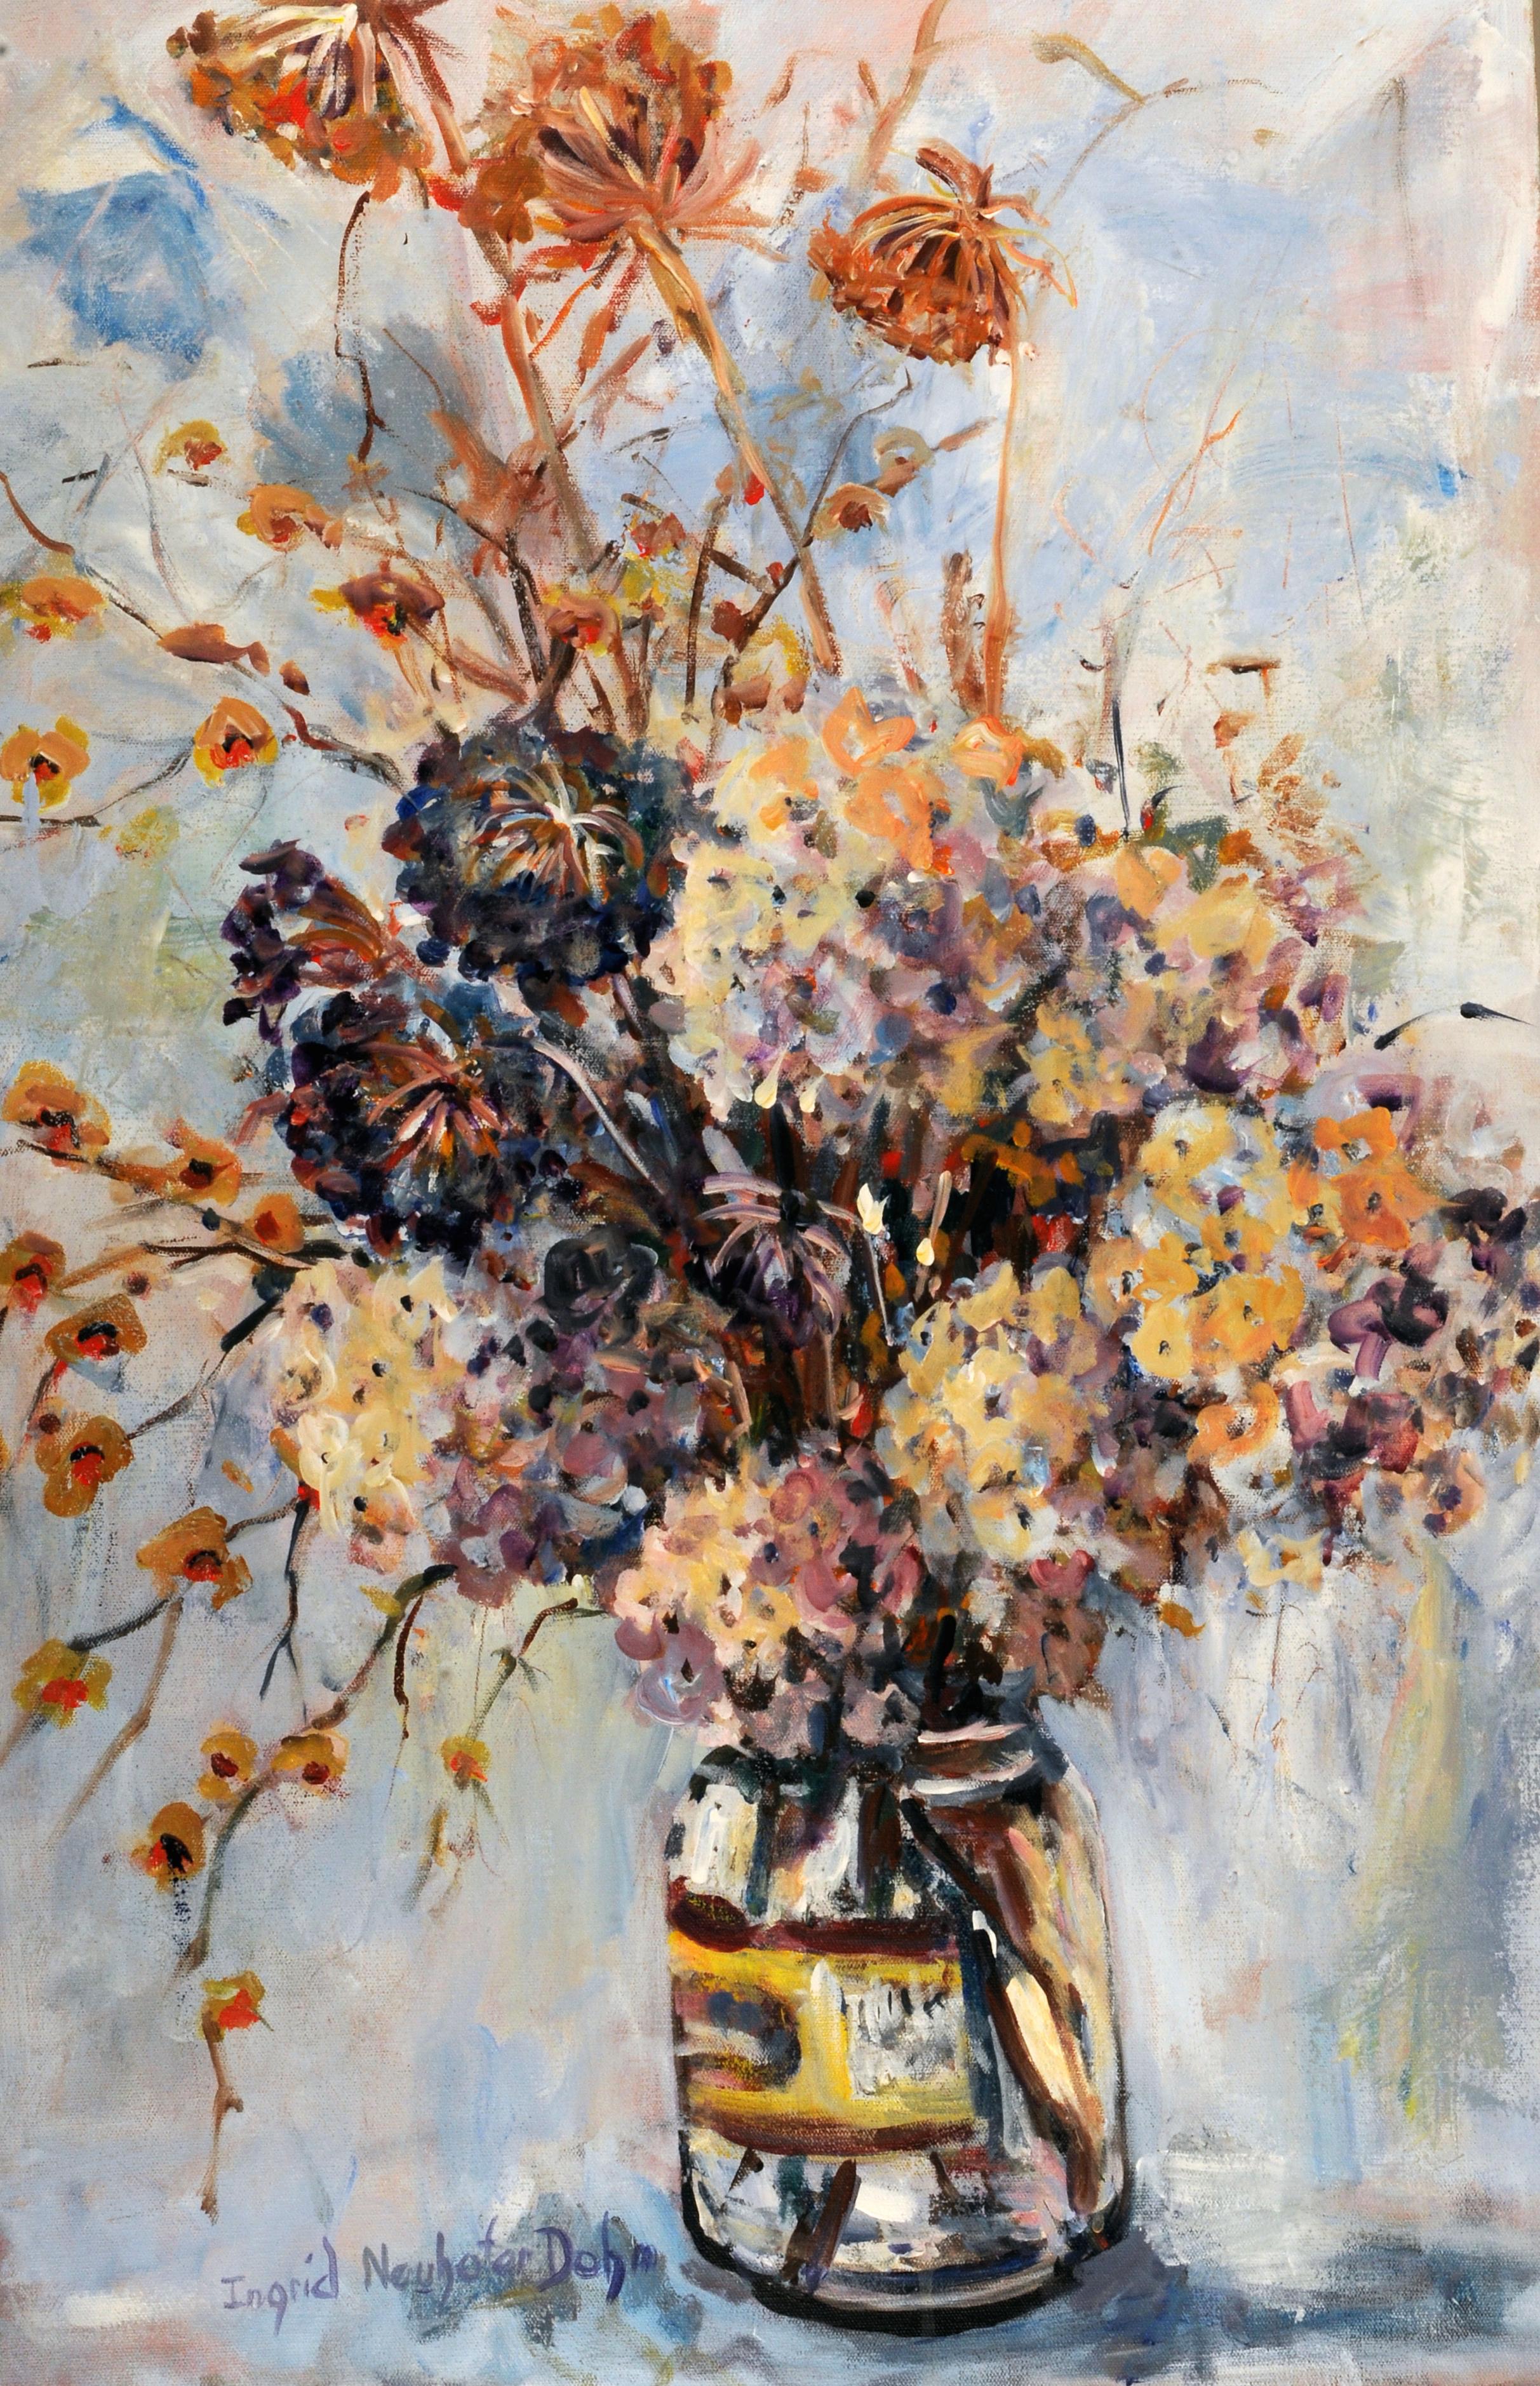 Ingrid Dohm Still-Life Painting - Dried Flowers in a Pickle Jar, Original Acrylic Floral Still Life Painting, 2015